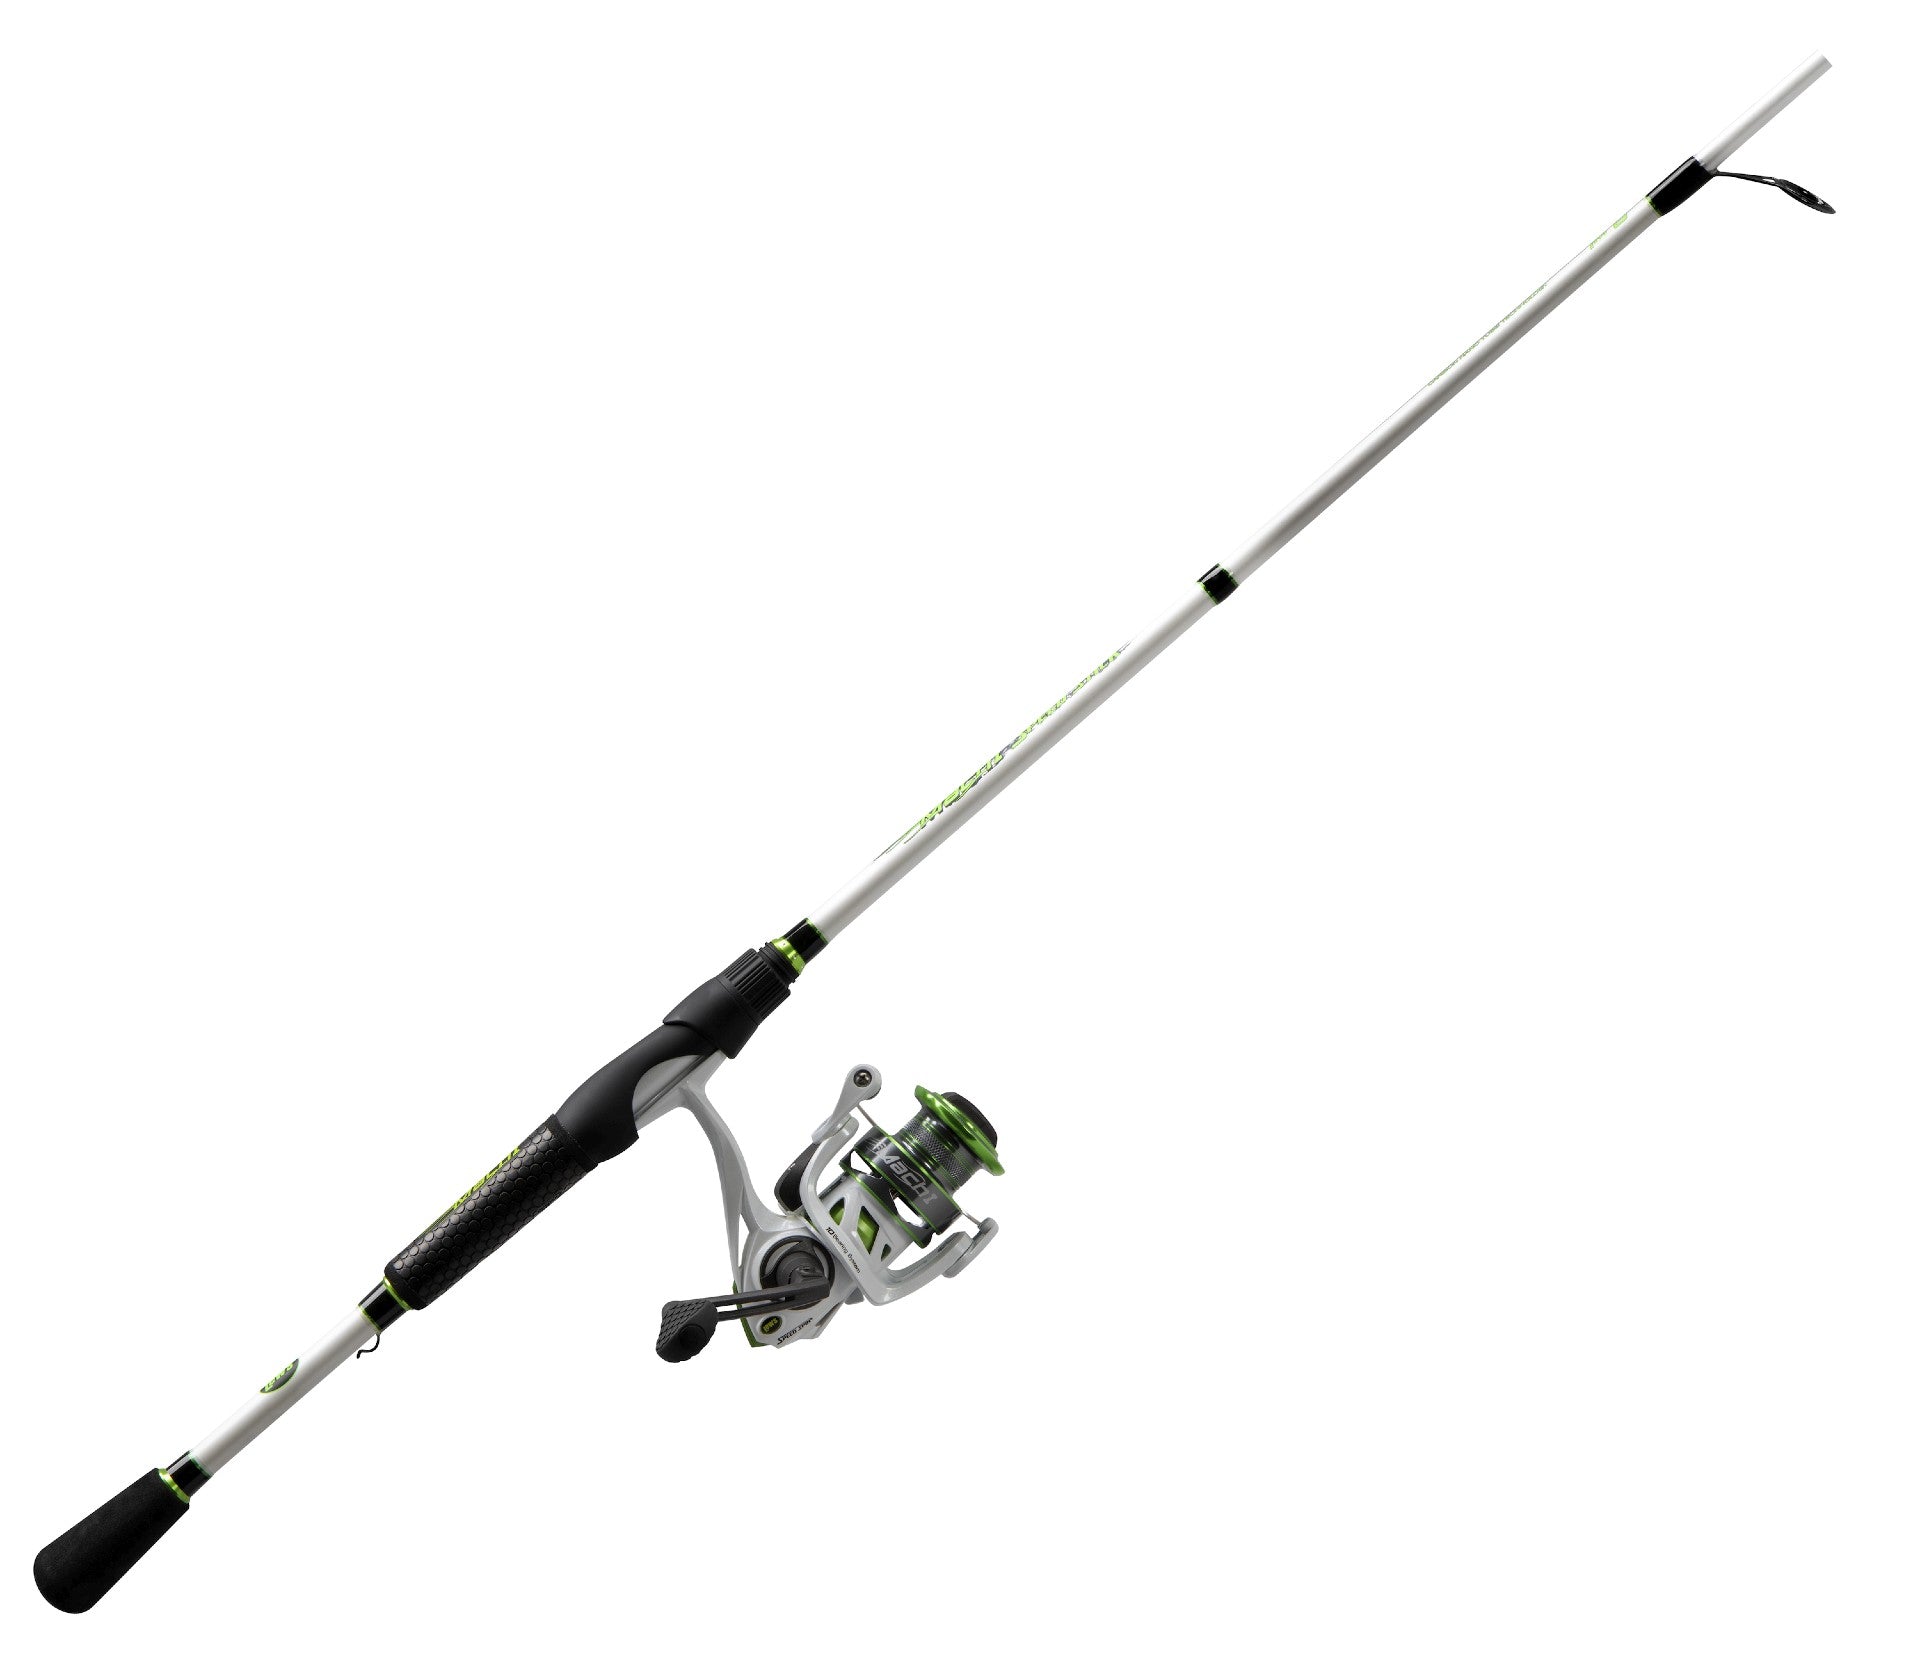 Lew's Mach 1 Speed Spin spinning rod and reel combo on a white background, showcasing the sleek design